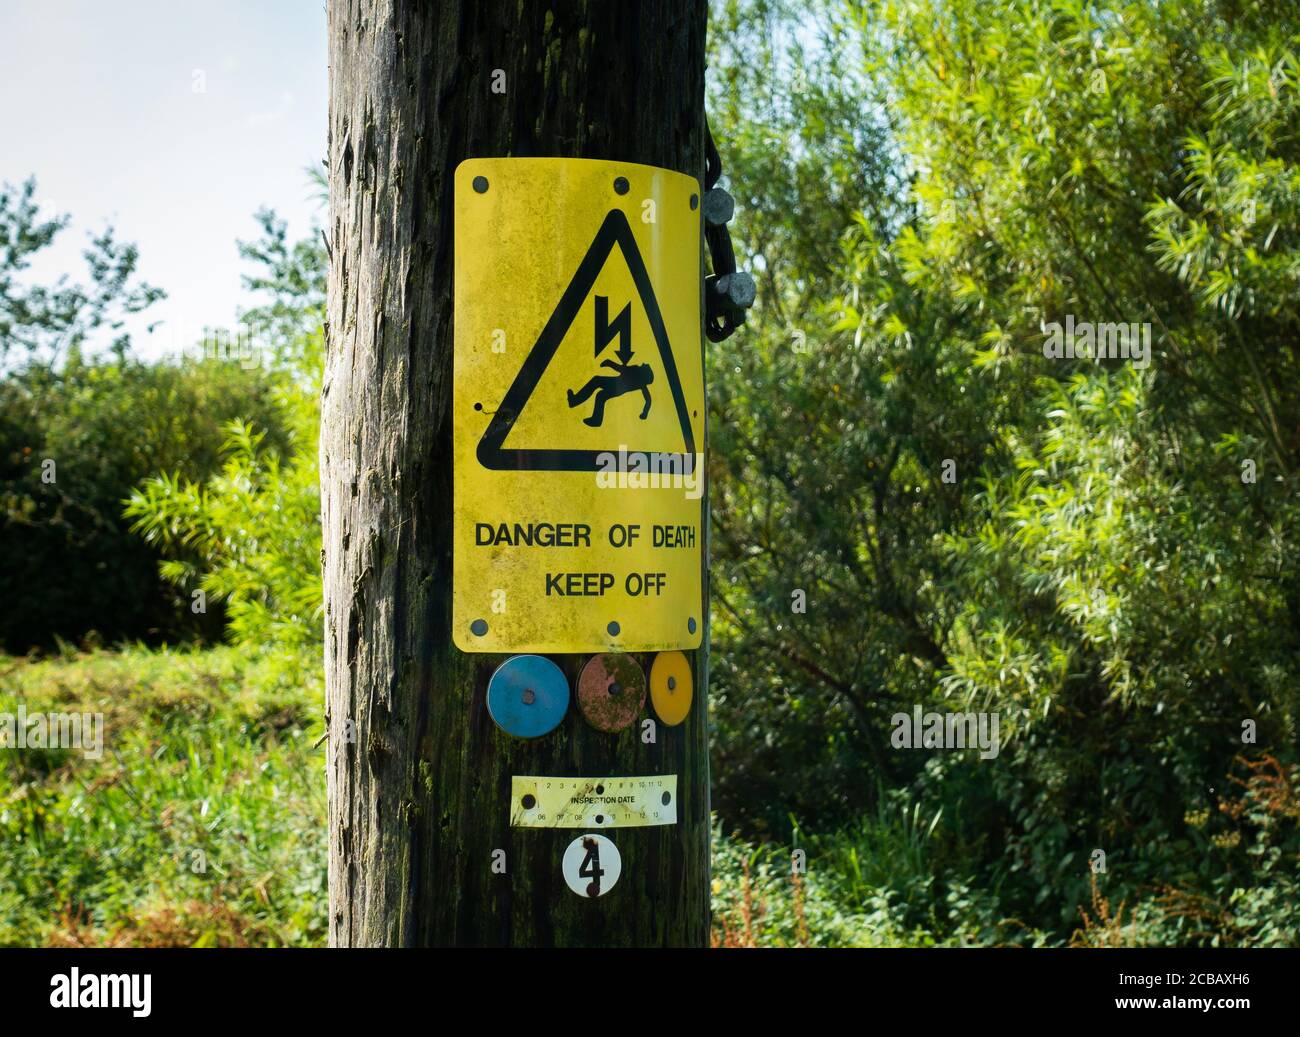 Electricity pole warning sign including danger of death lettering Stock Photo